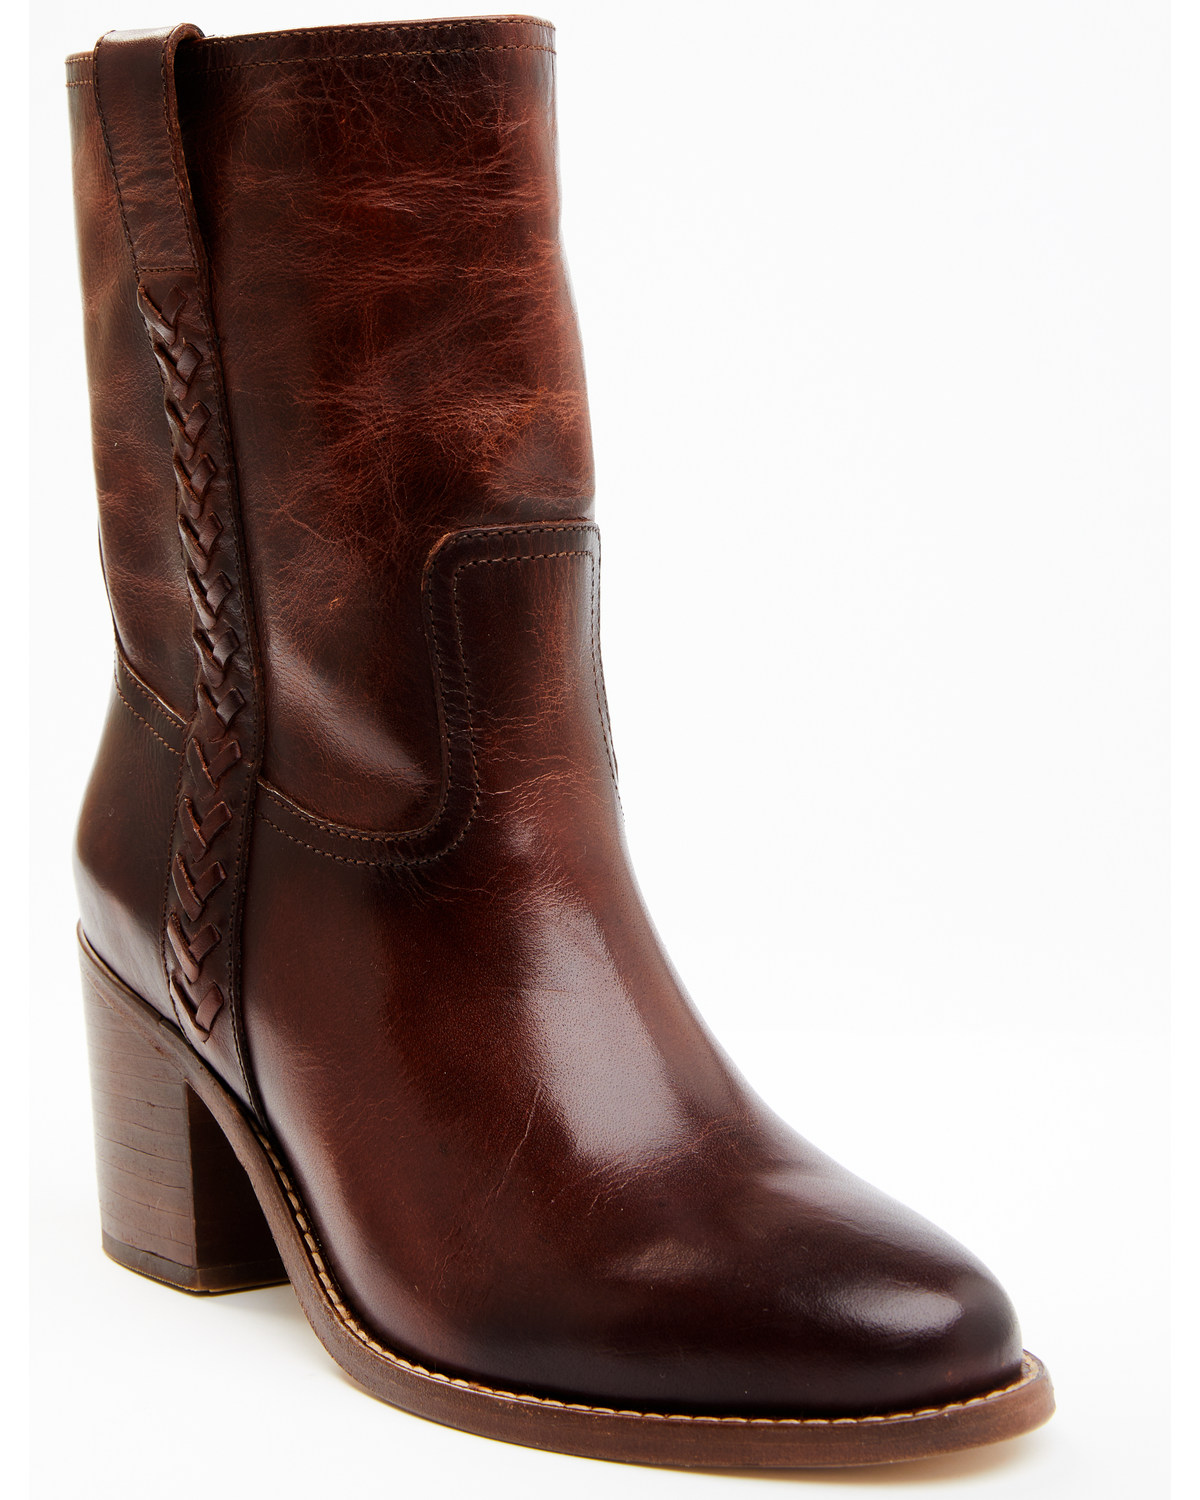 Cleo + Wolf Women's Cranberry Western Boots - Round Toe